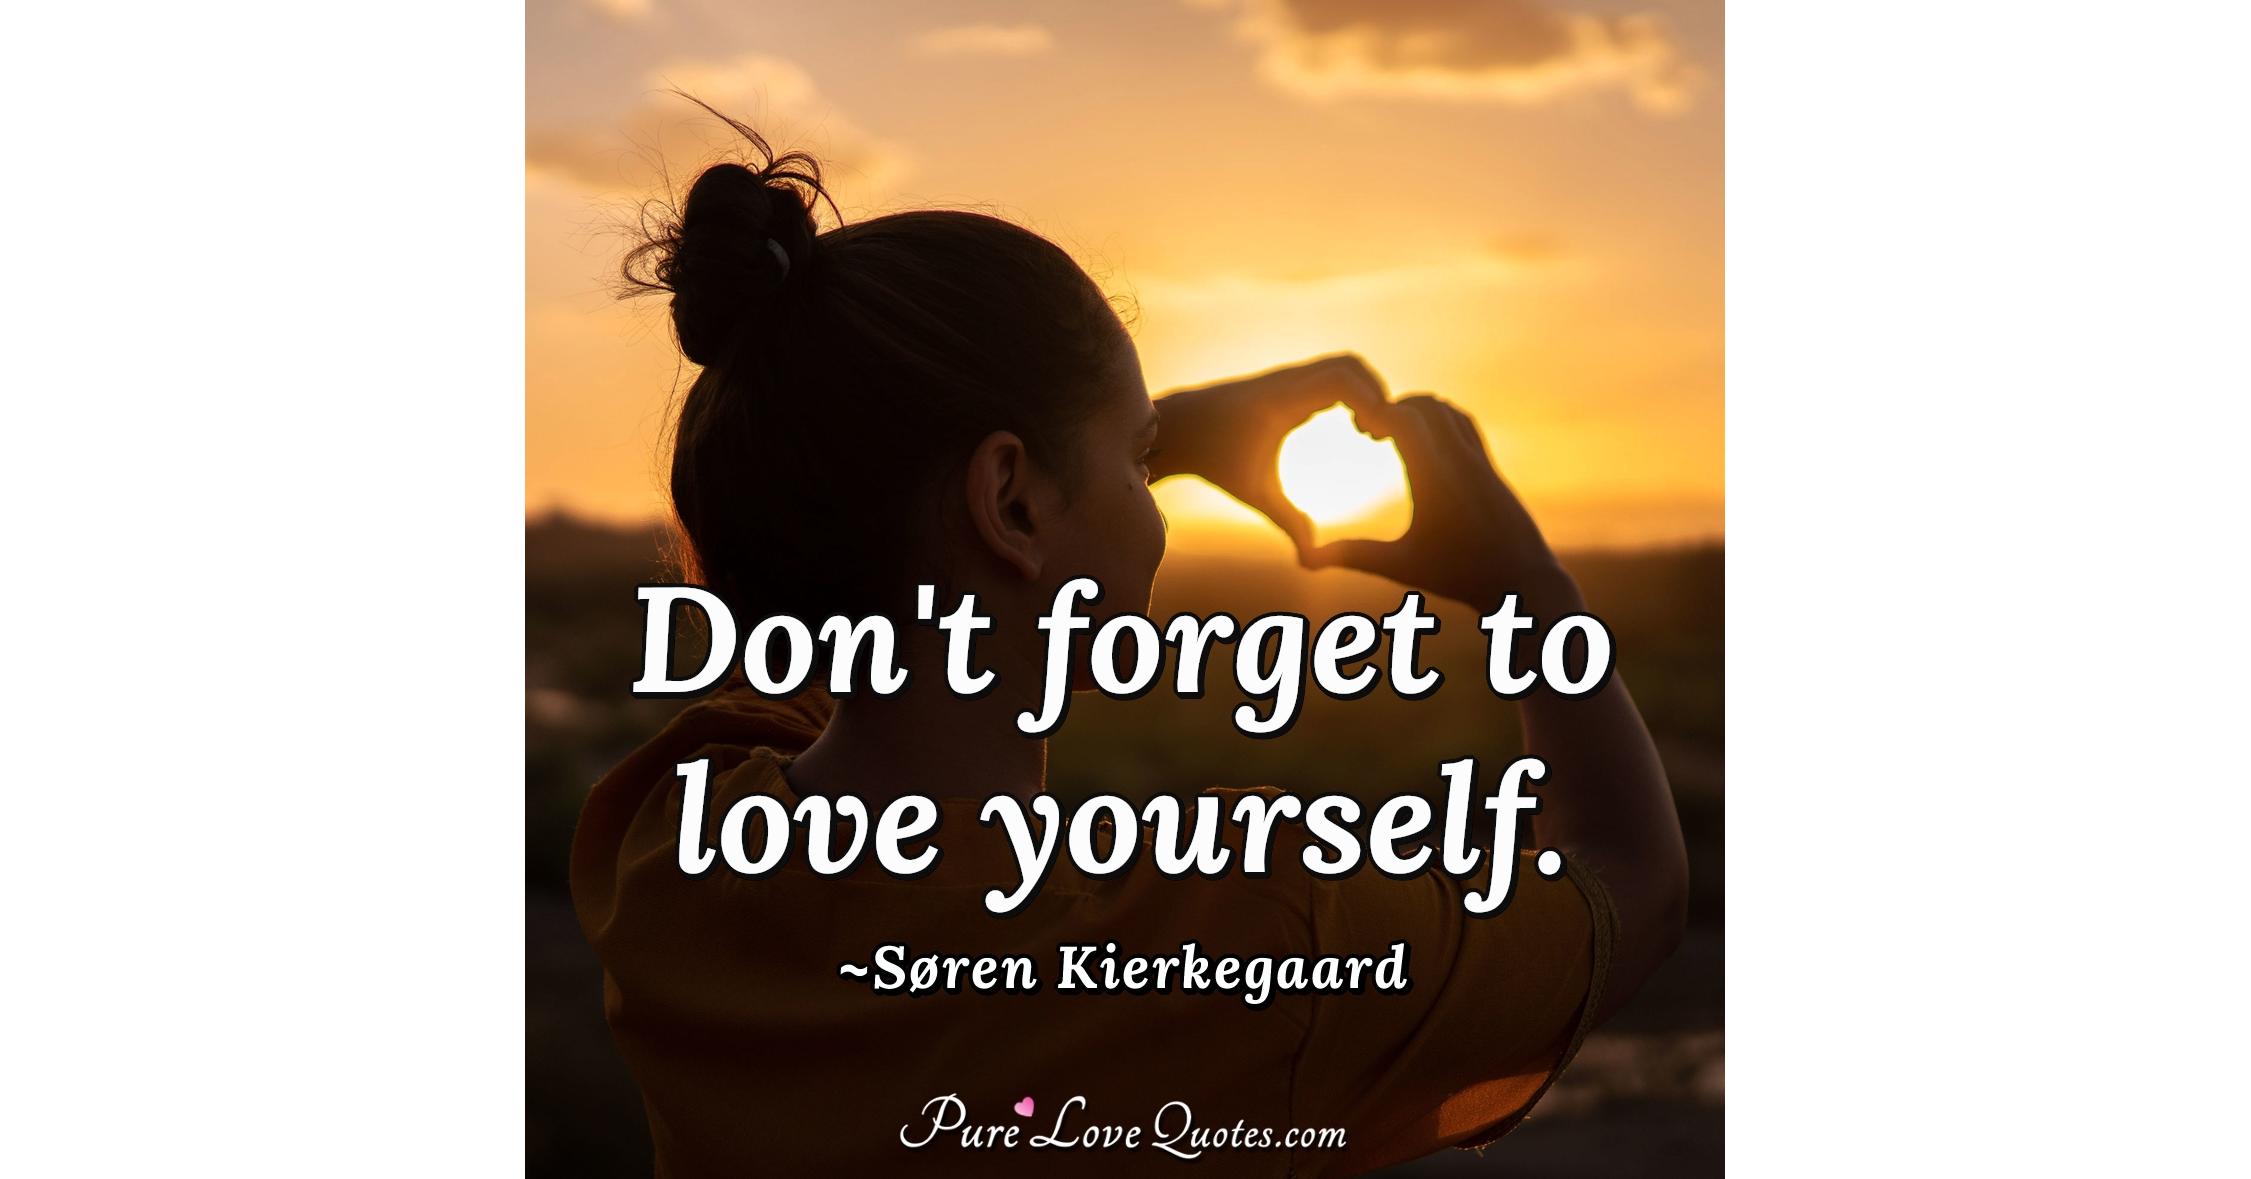 Love yourself, accept yourself, forgive yourself, and be good to